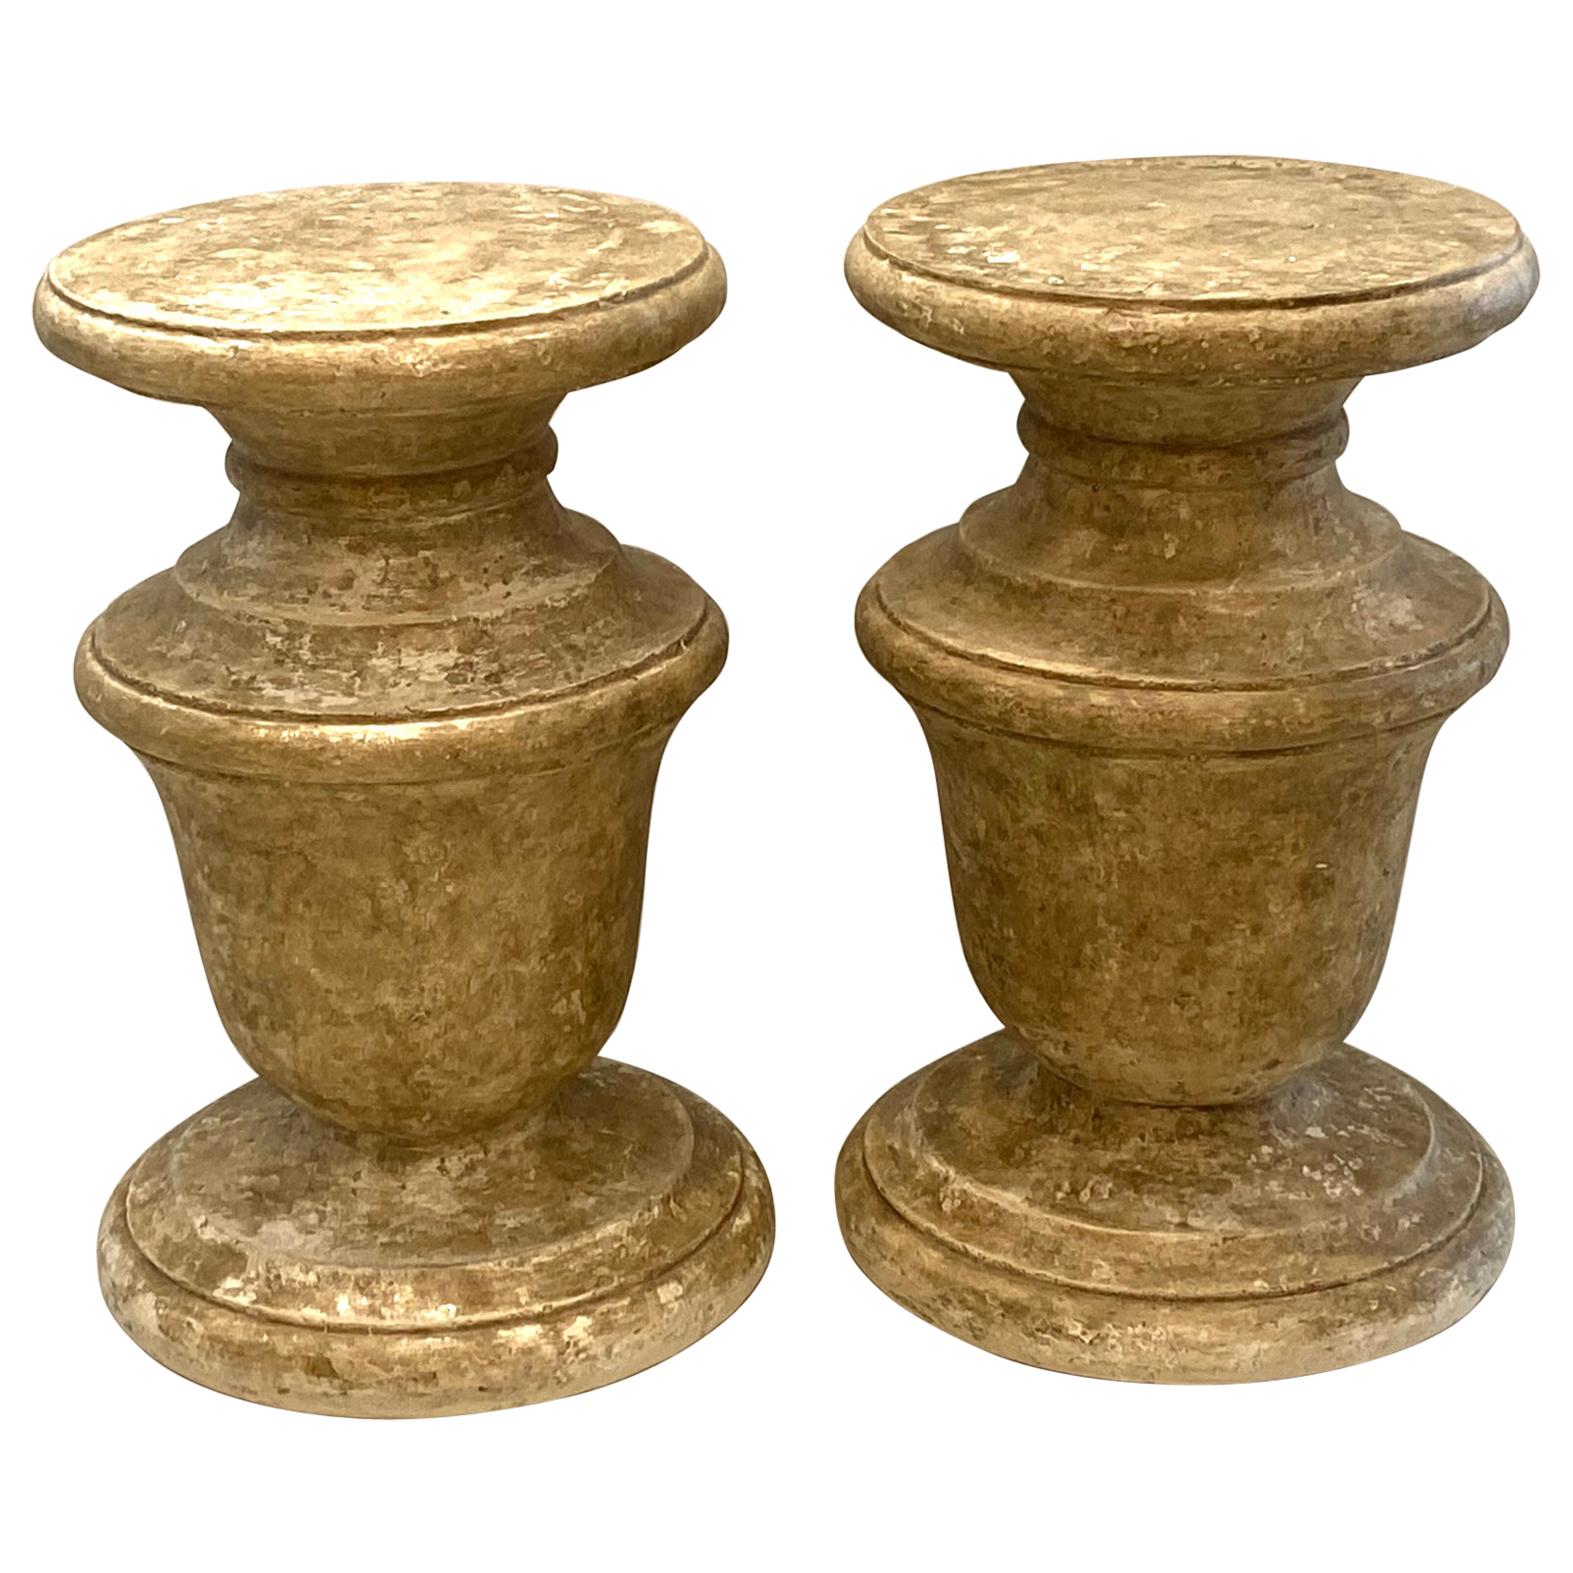 Pair of Large Plaster Round Column Pedestals with Faux Finish